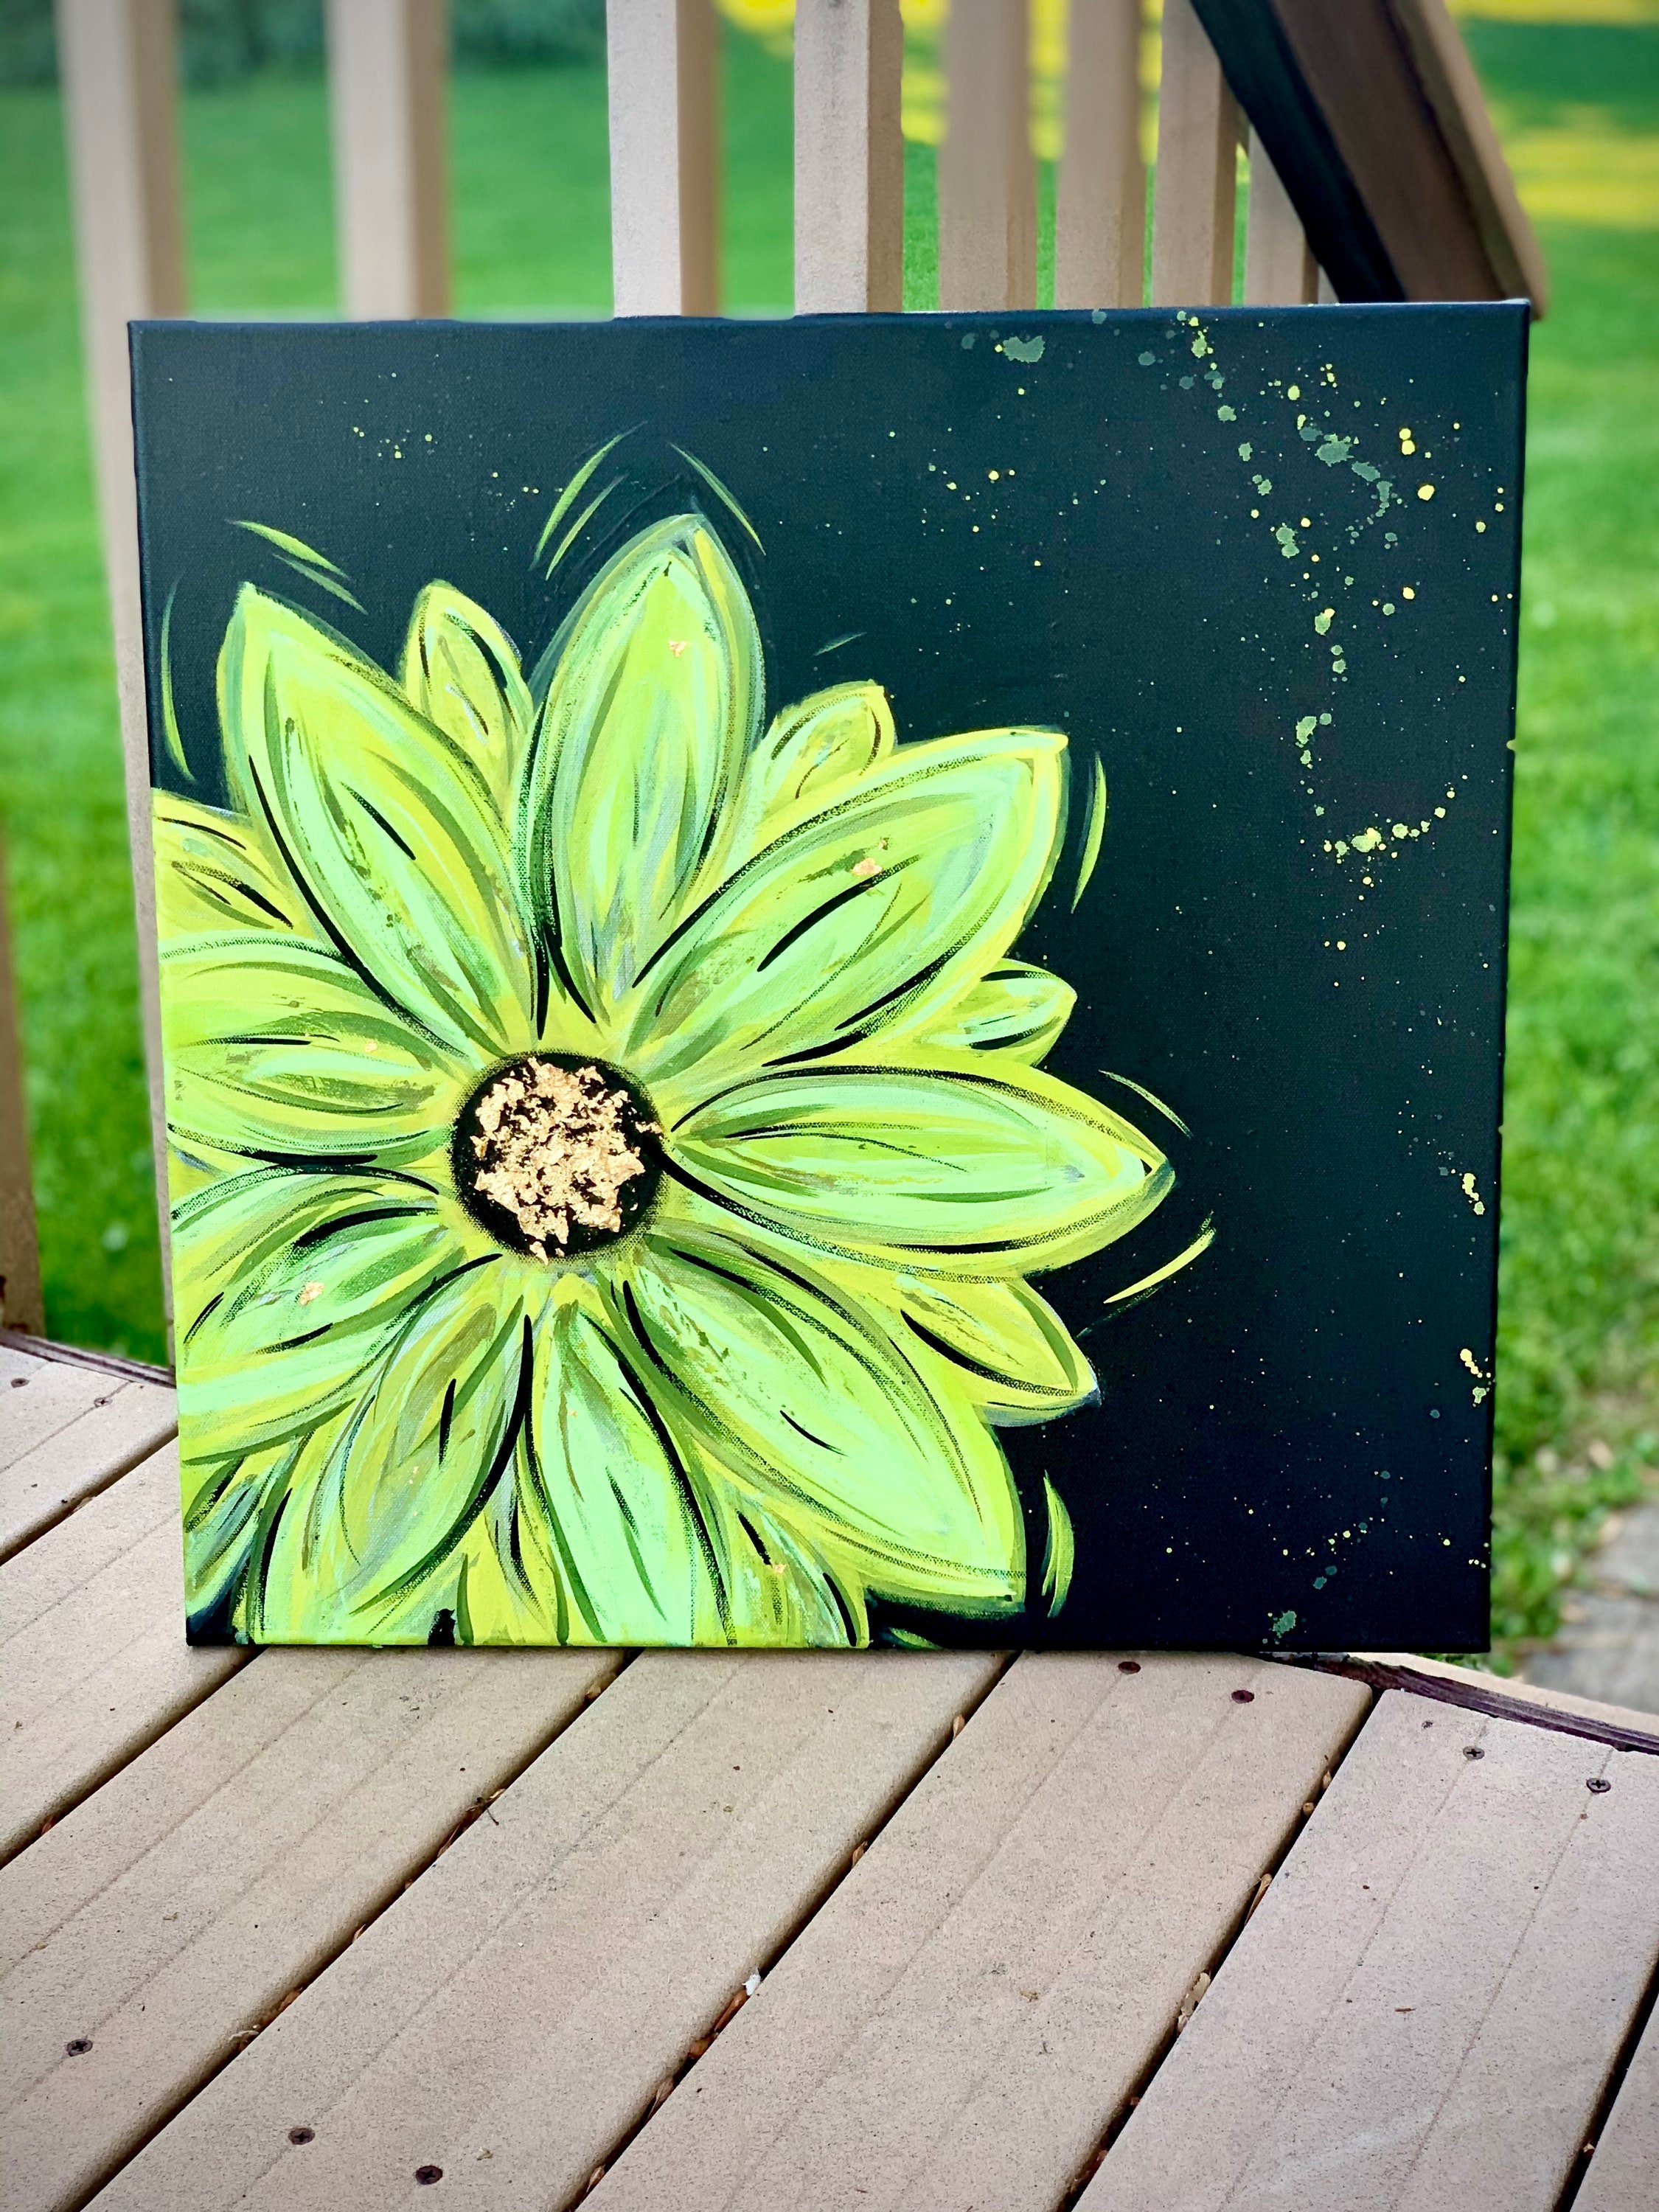 Cute Abstract Acrylic 8x10 Canvas Painting With Flowers, Leaves